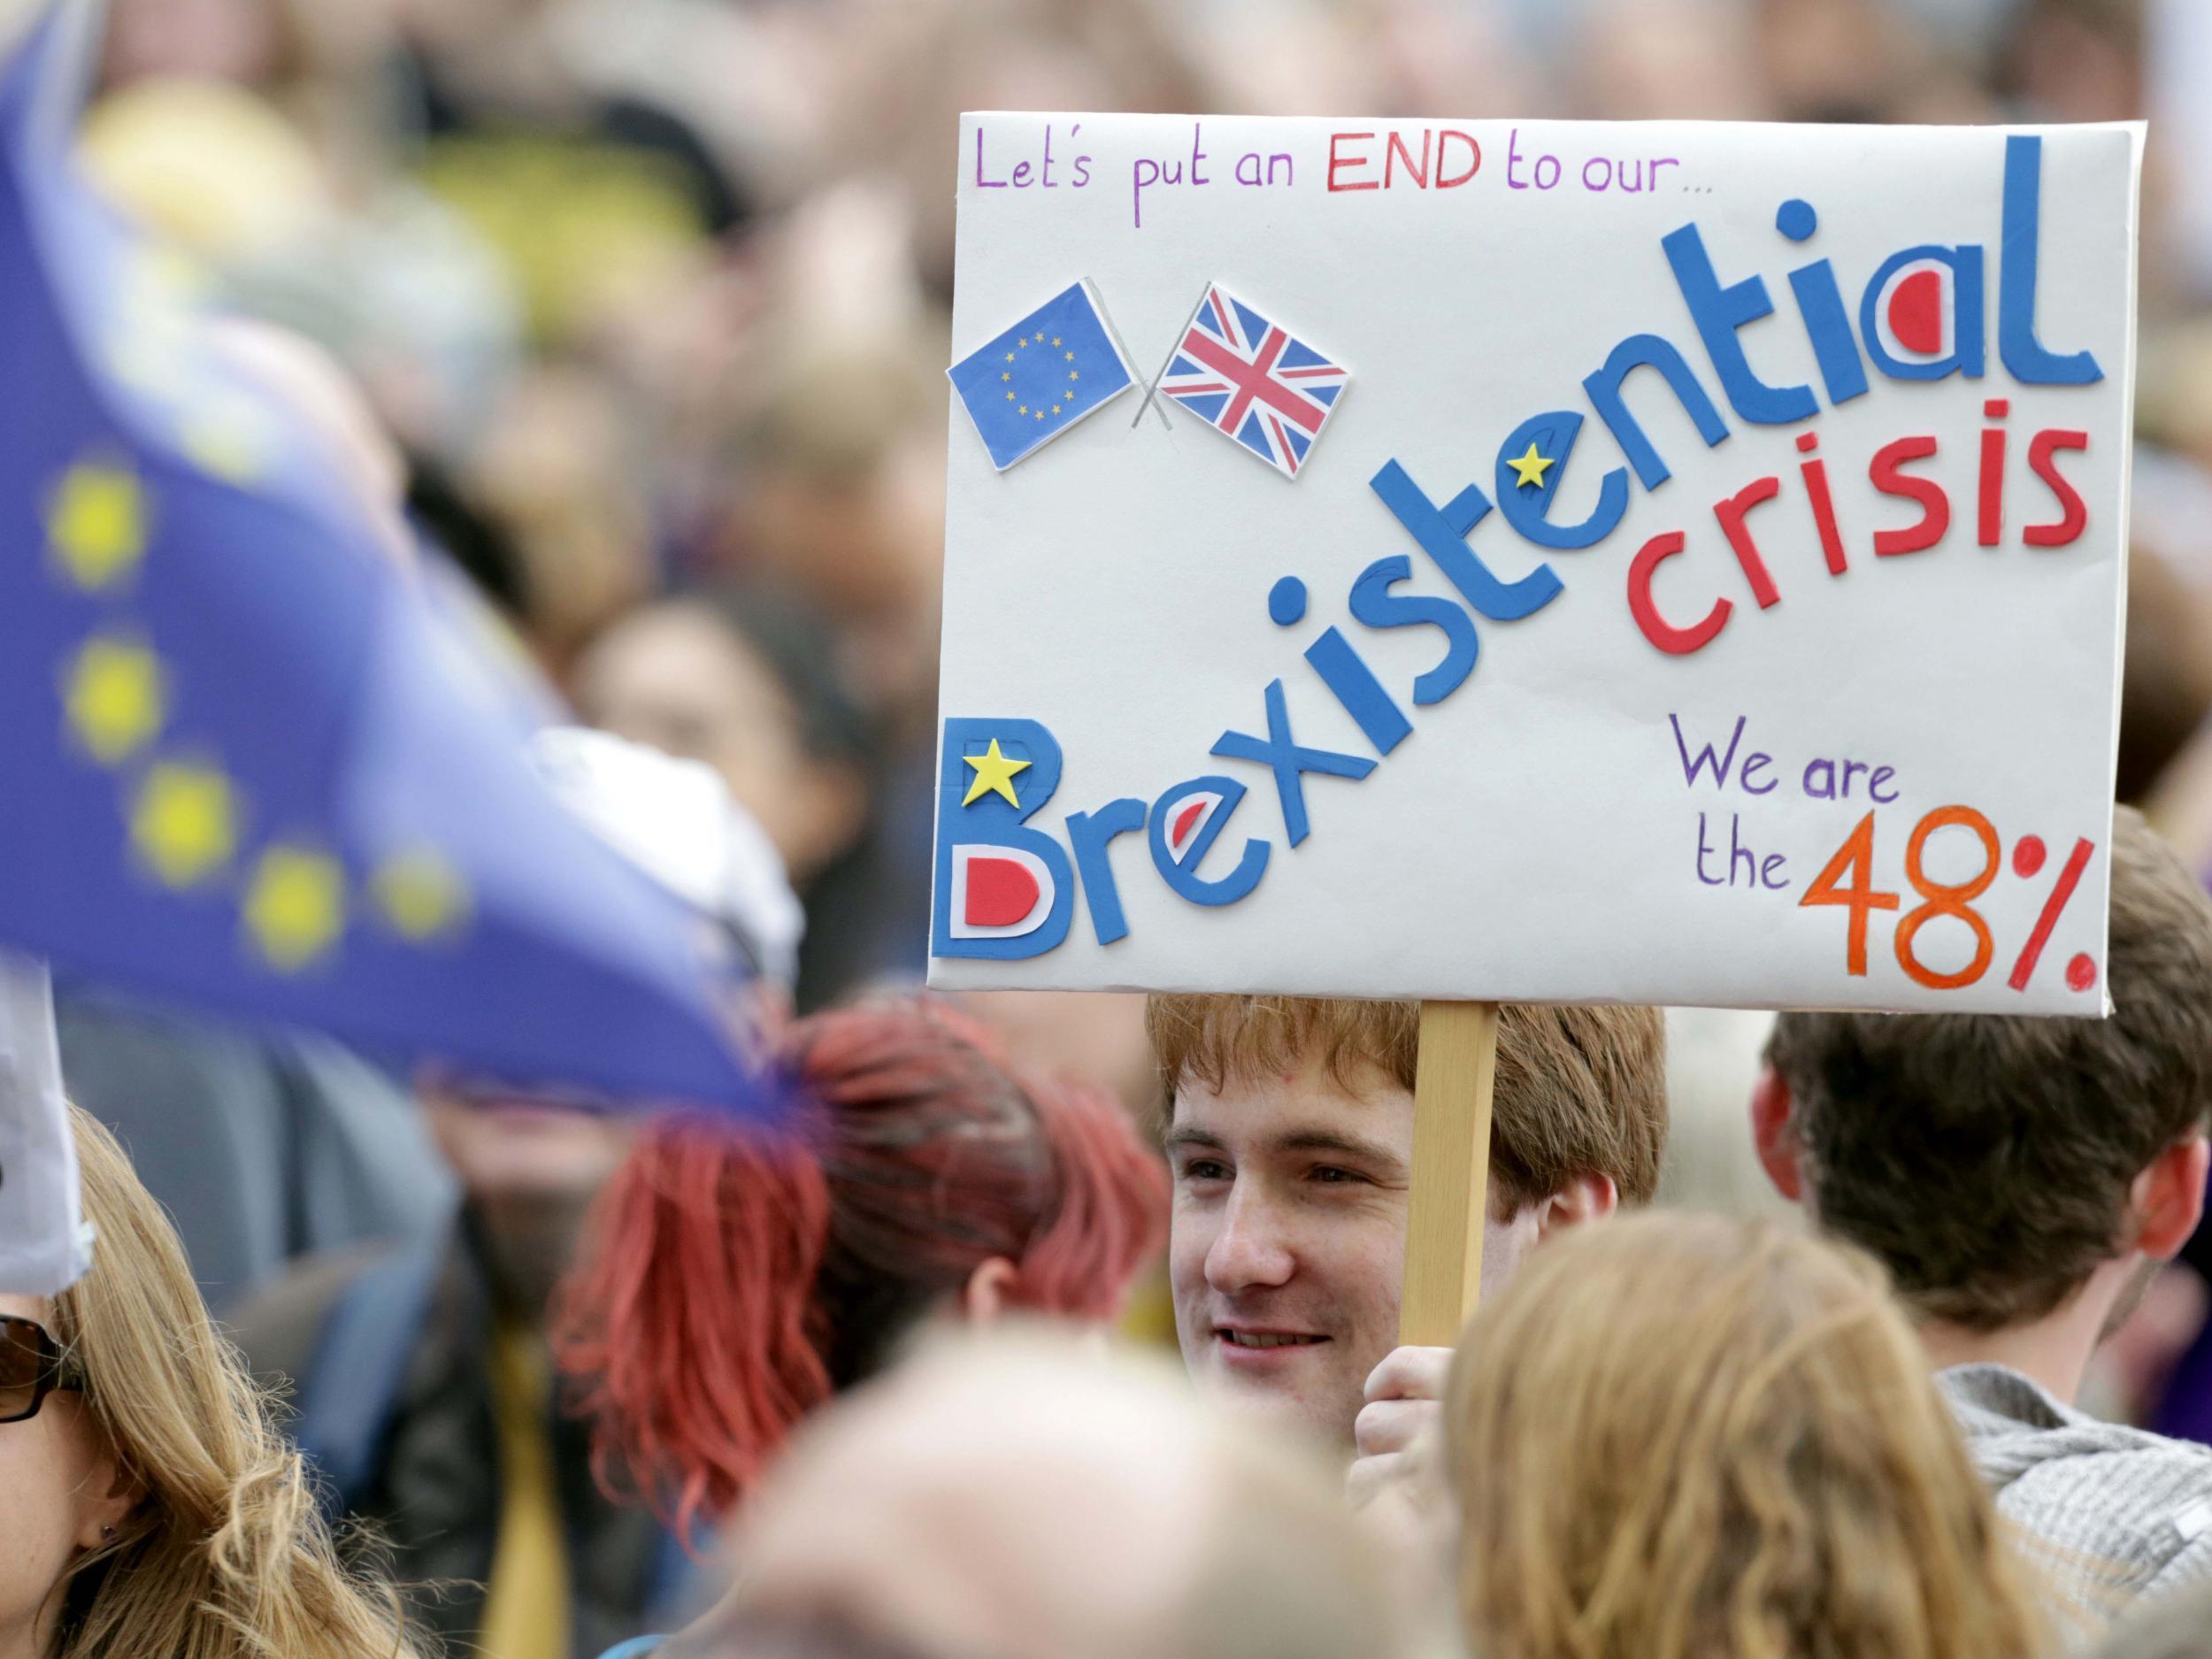 People took to the streets to protest after the Brexit vote (file photo)